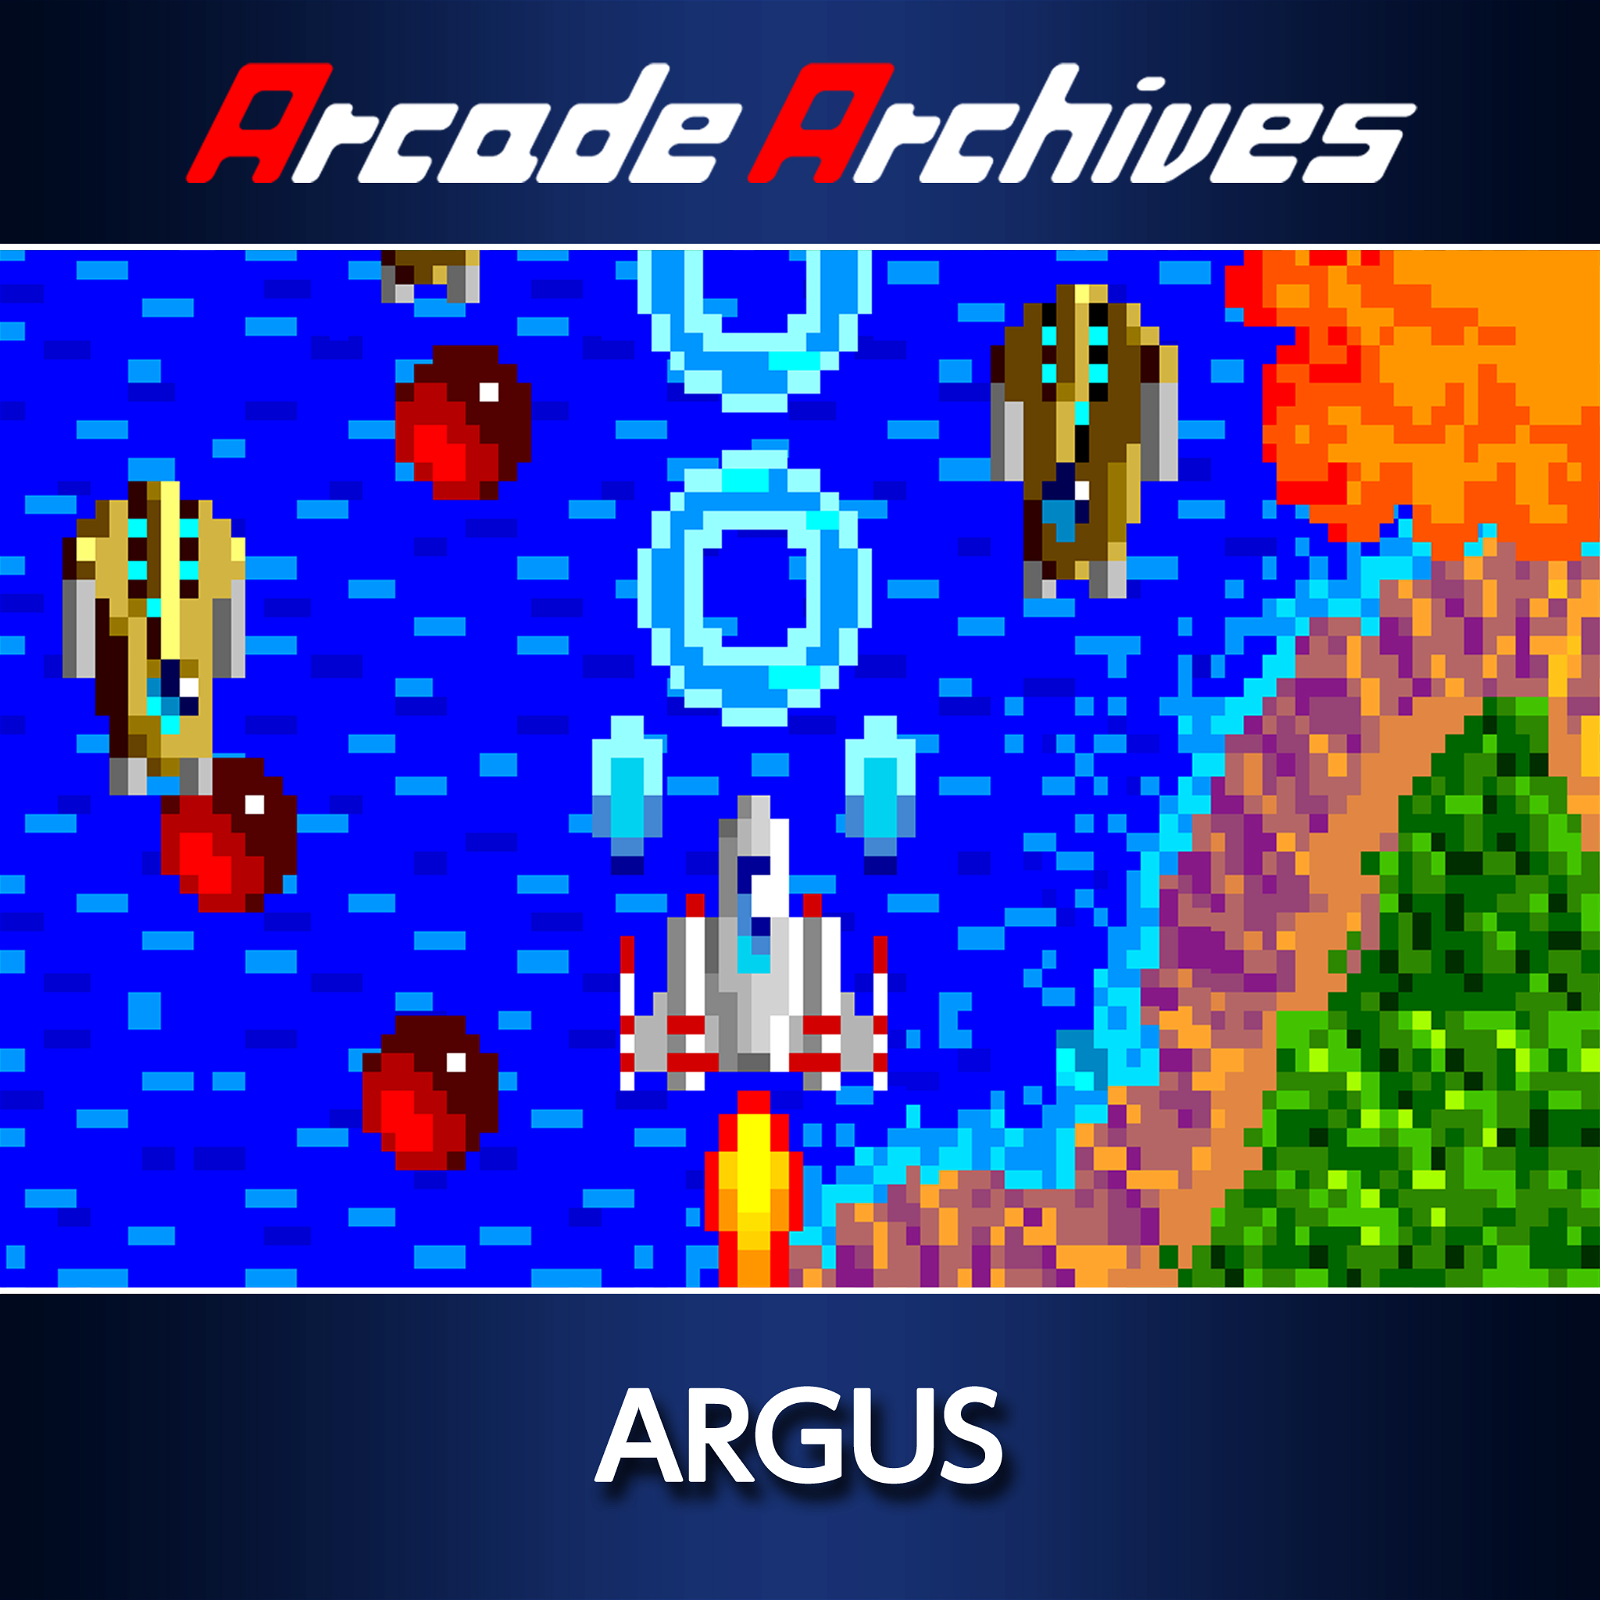 Image of Arcade Archives ARGUS